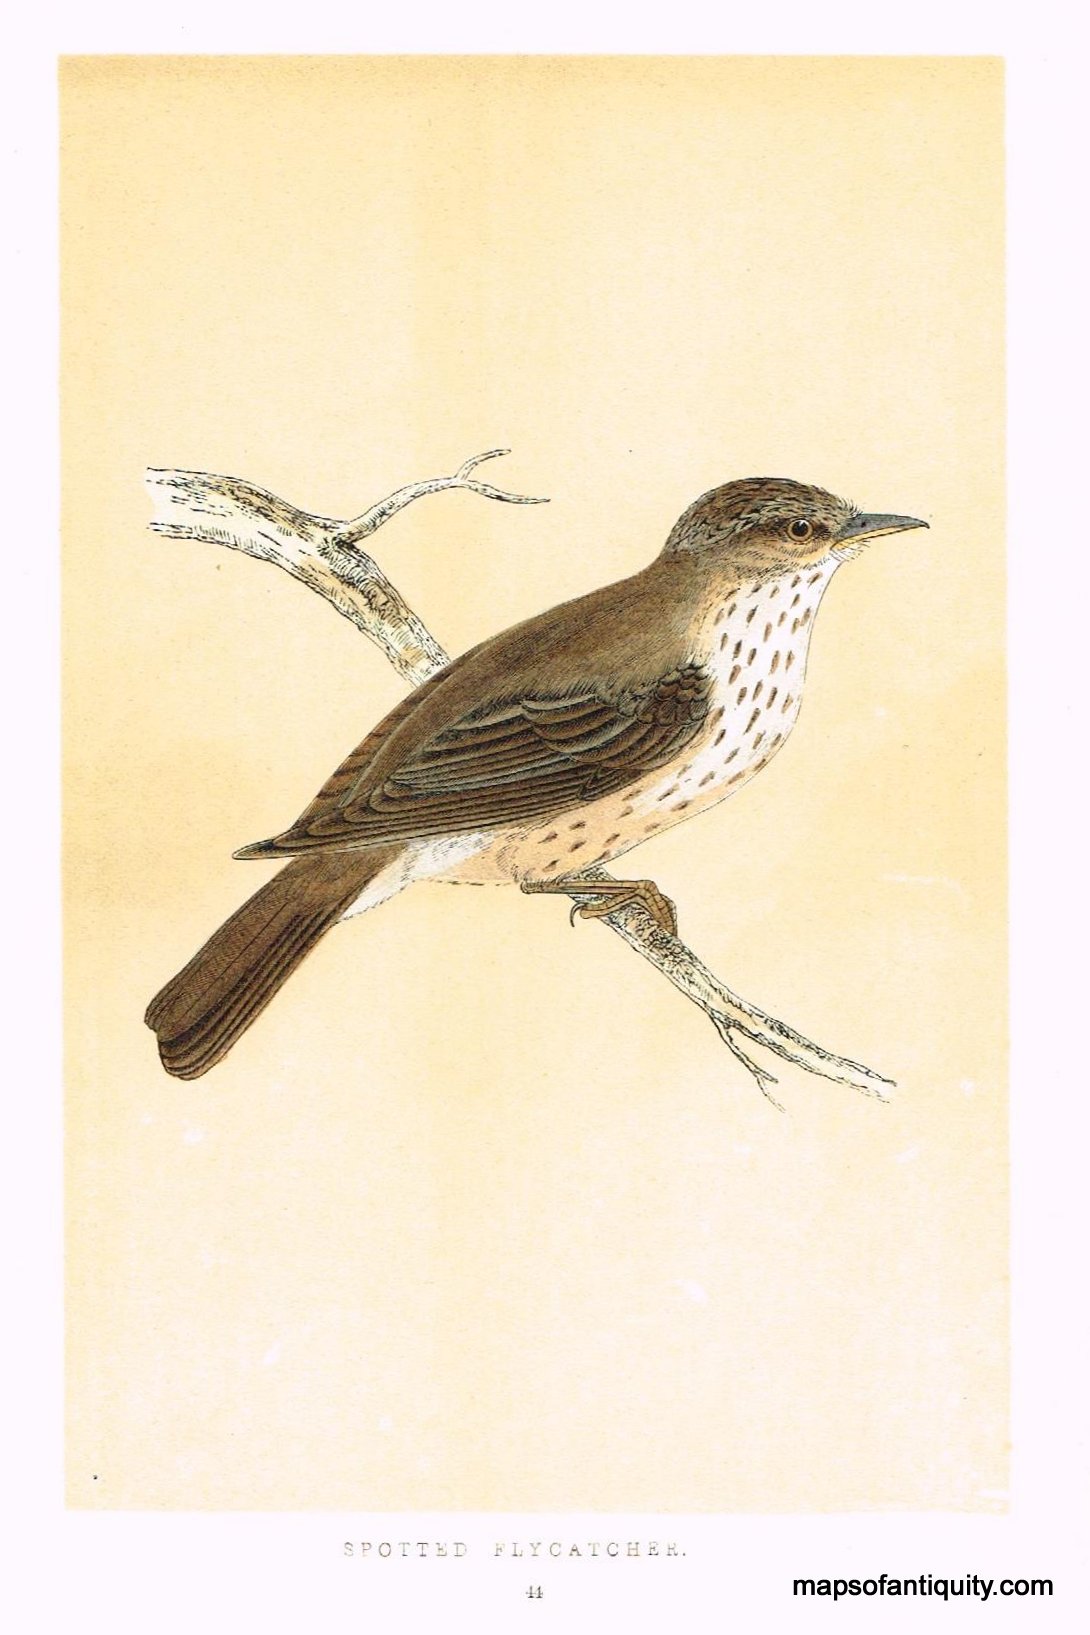 Antique-Hand-Colored-Engraved-Illustration-Spotted-Flycatcher-Natural-History-Birds-1851-Morris-Maps-Of-Antiquity